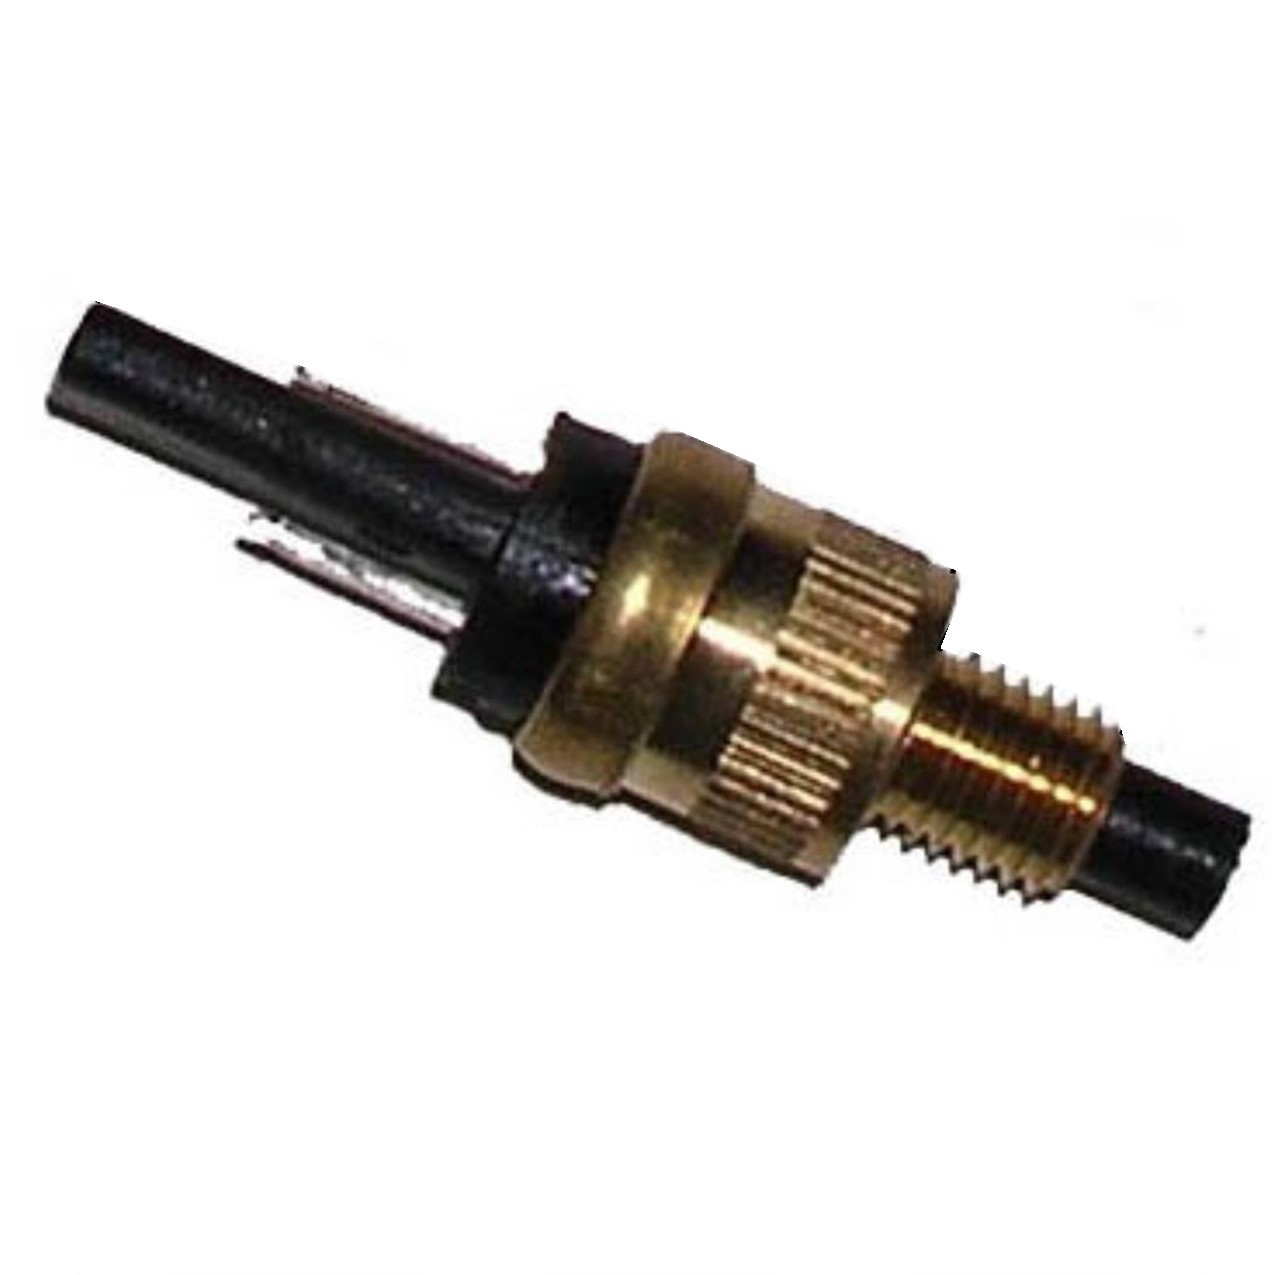 BRAKE SWITCH (MOPED) Threads=6mm Base to Tip=9mm Out=Closed, In=Open Circuit